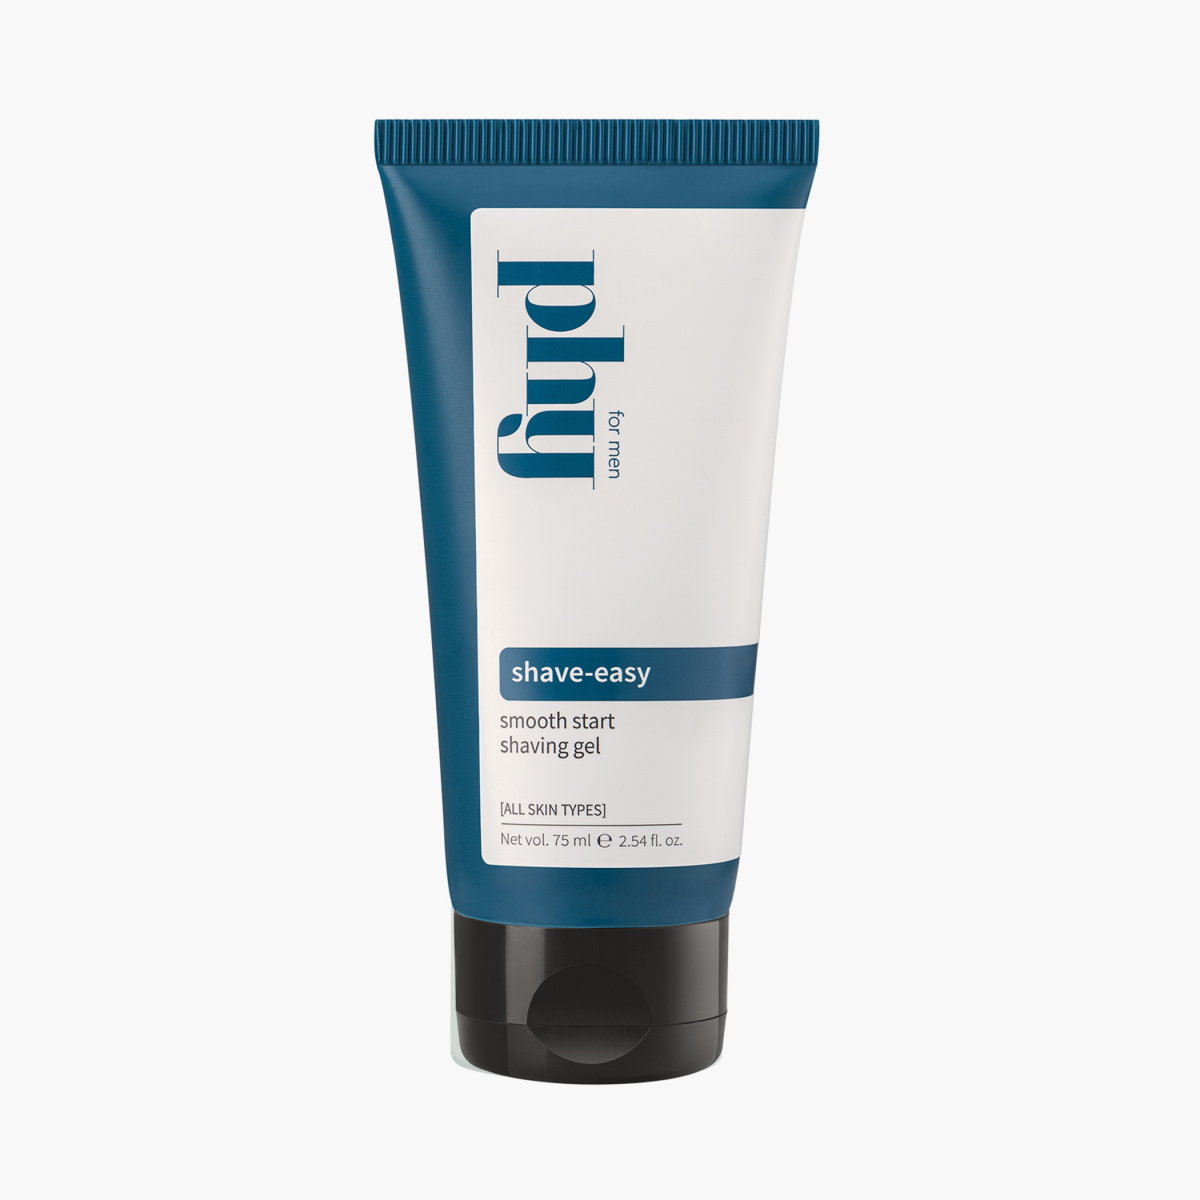 PHY Shave-Easy Smooth Start Shaving Gel